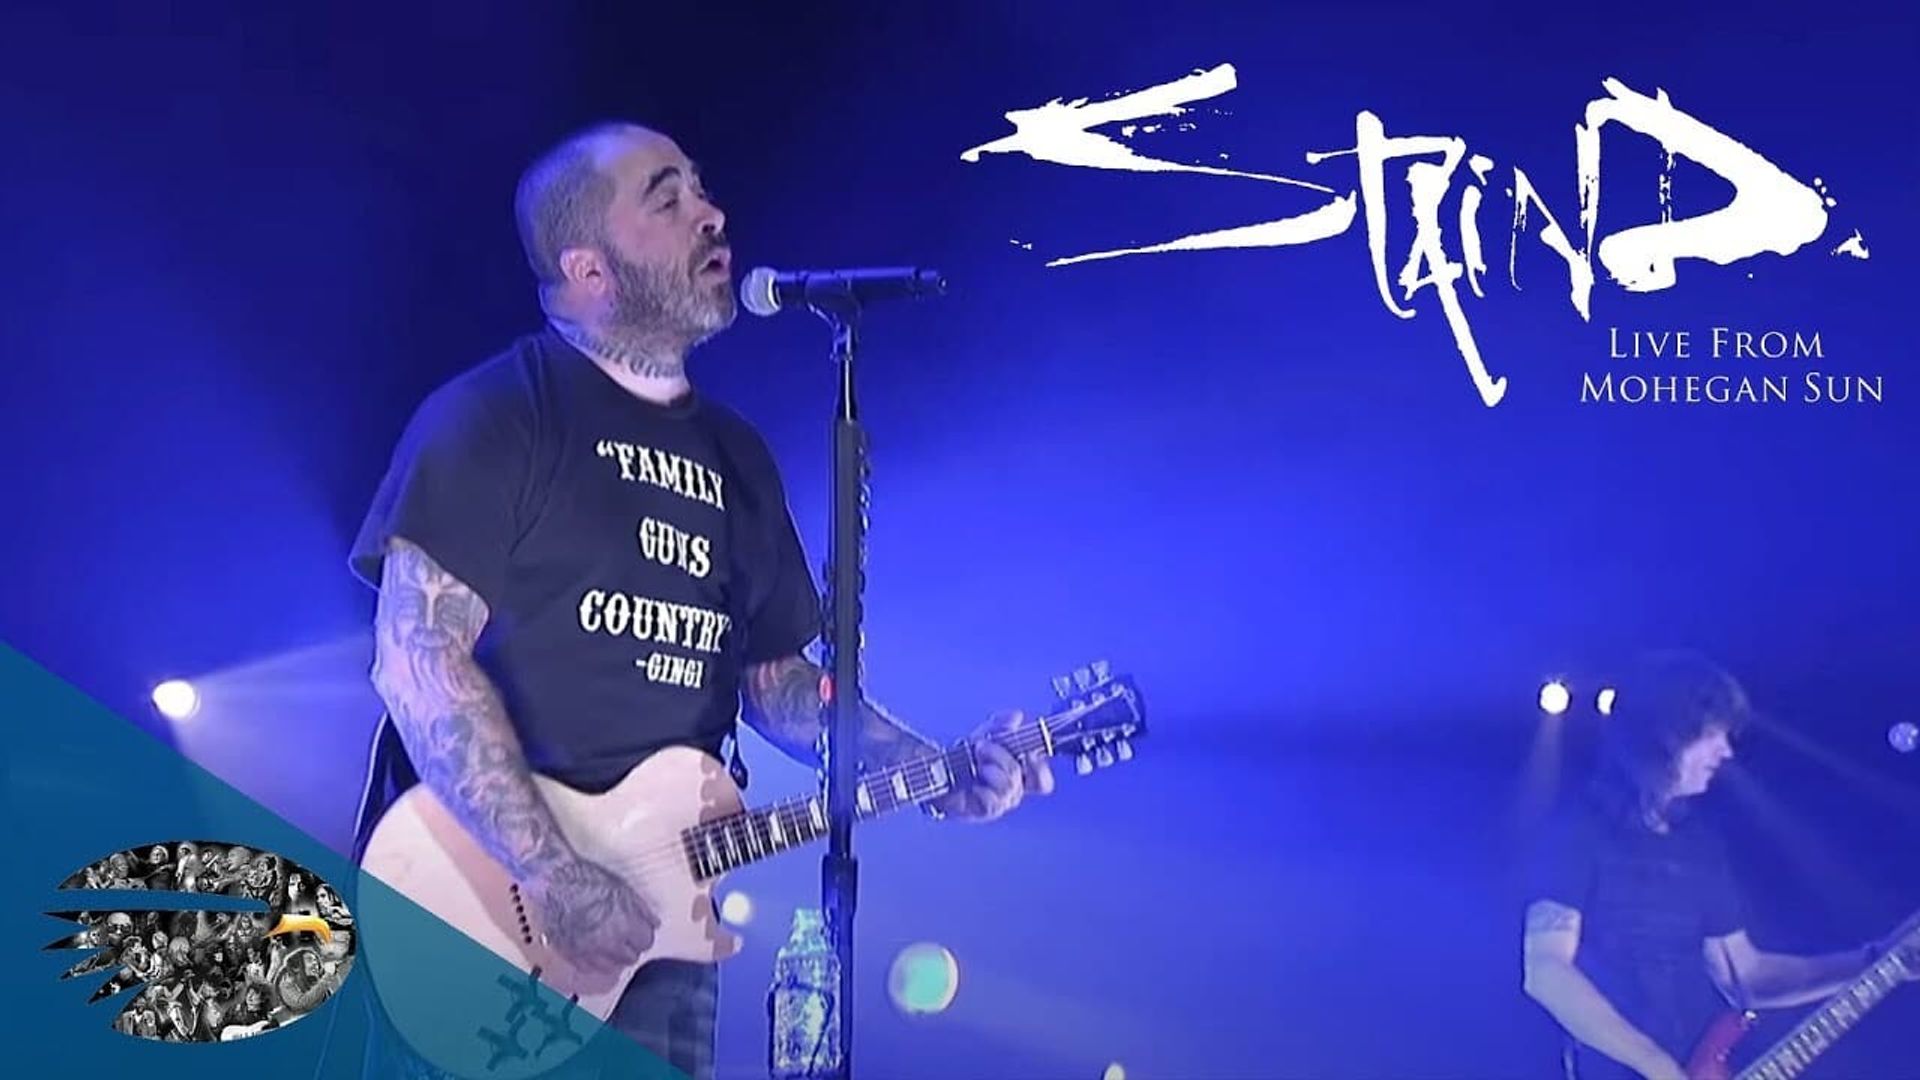 Staind: Live from Mohegan Sun background